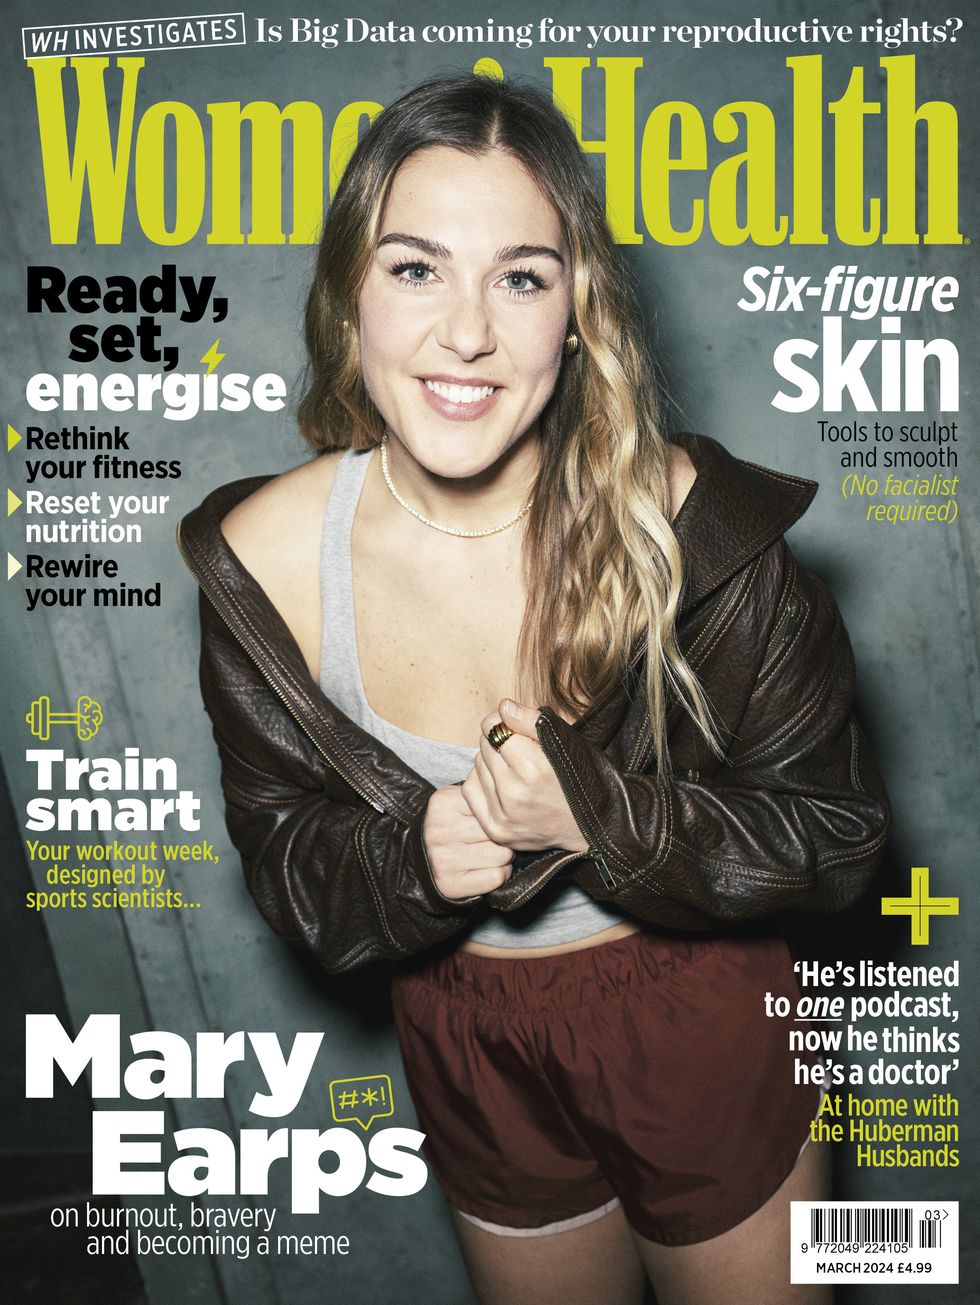 a woman on a magazine cover